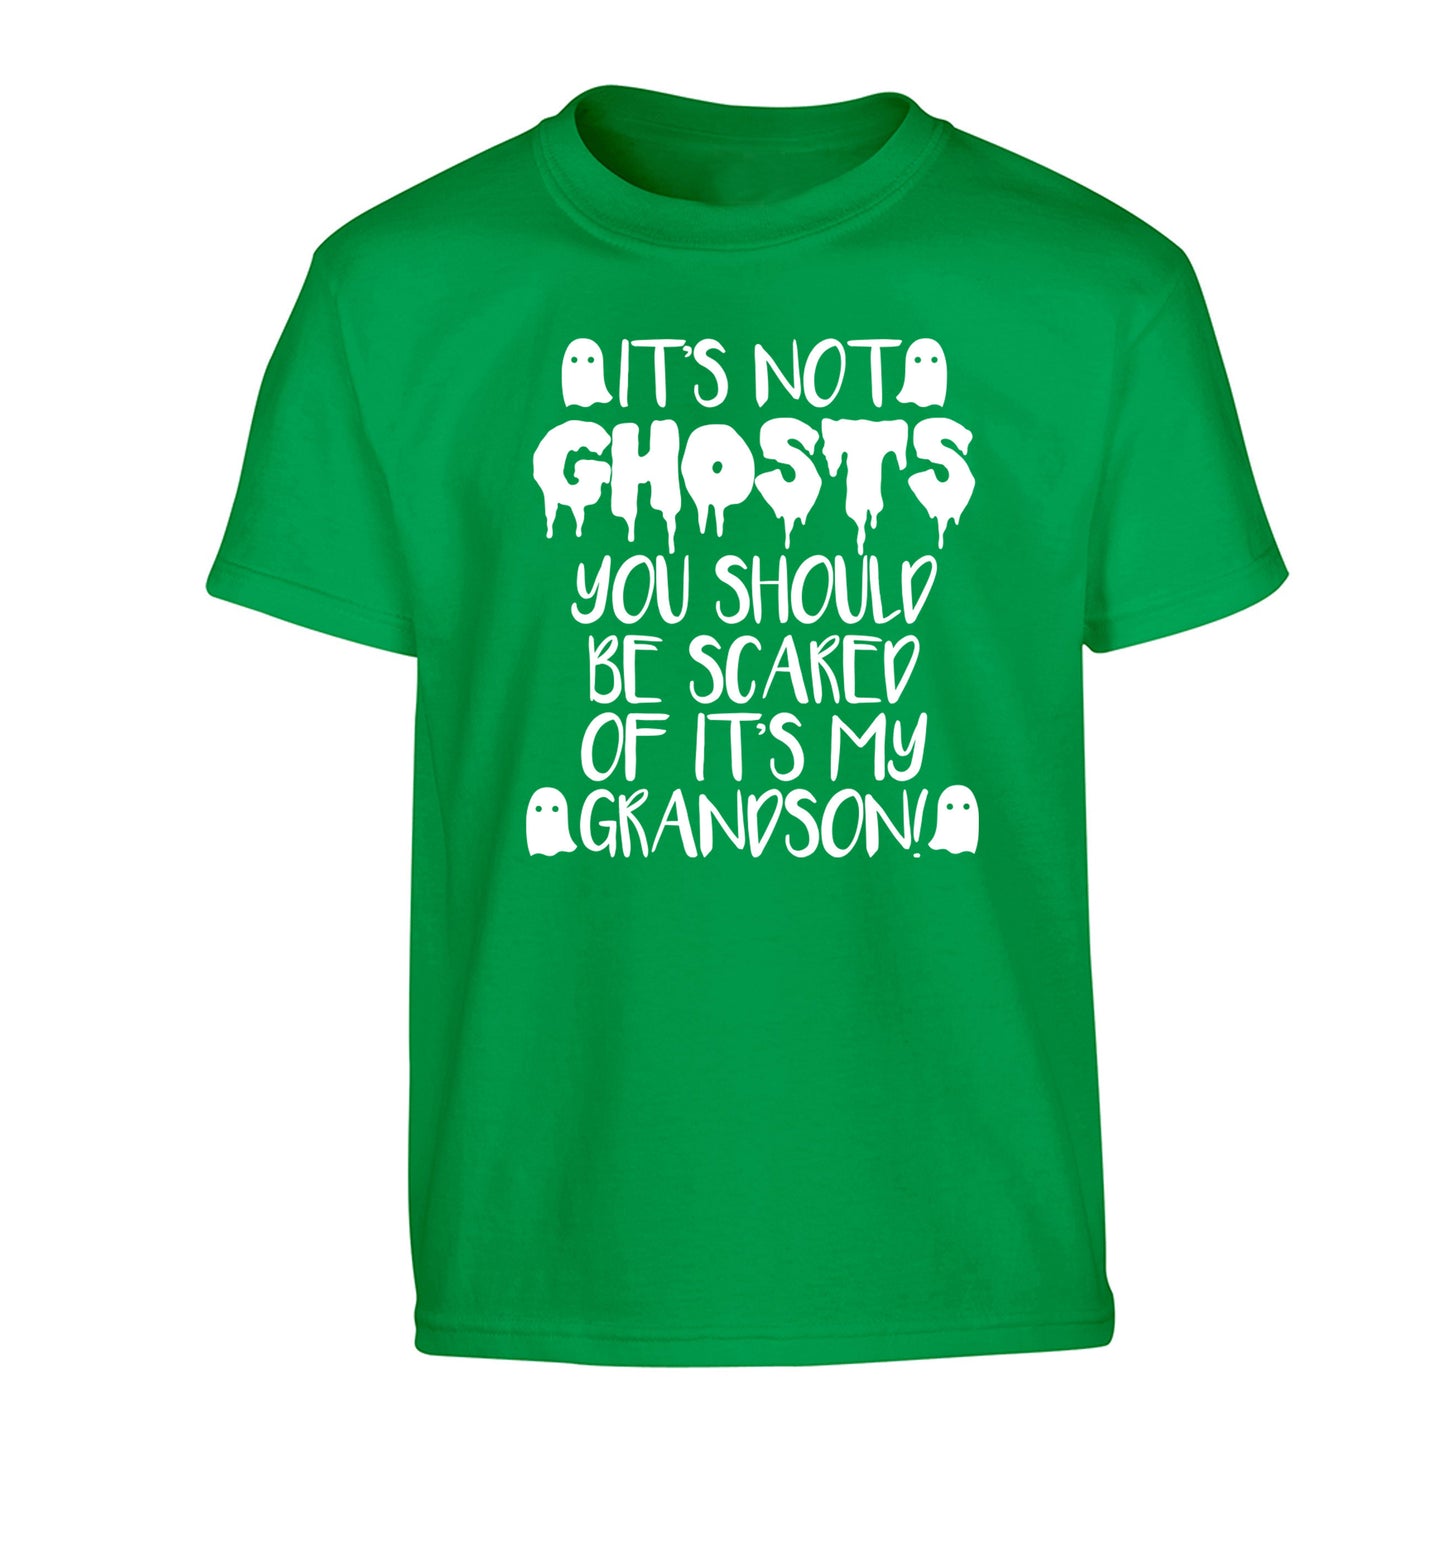 It's not ghosts you should be scared of it's my grandson! Children's green Tshirt 12-14 Years